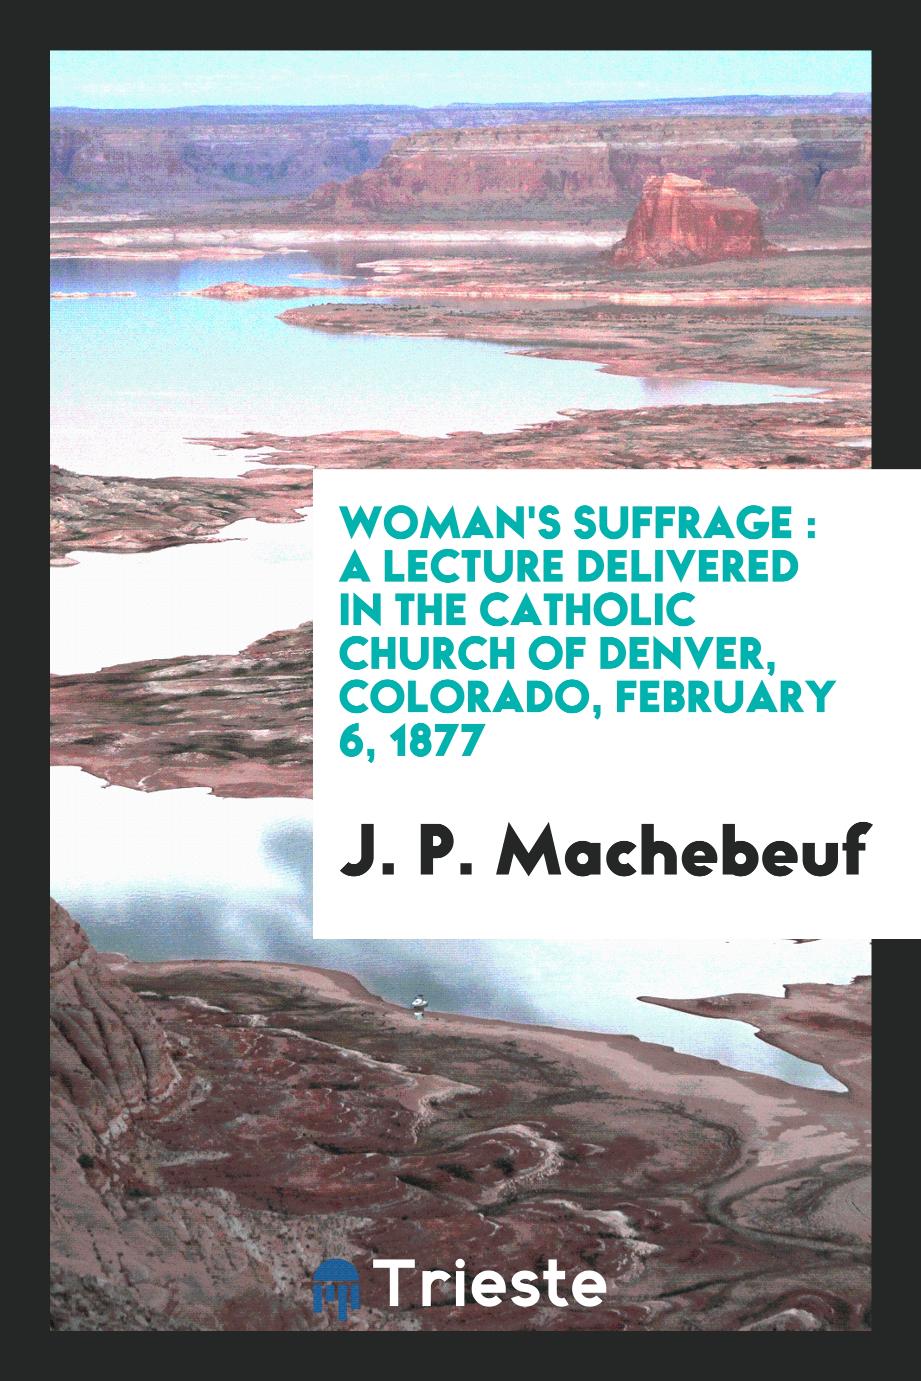 Woman's suffrage : a lecture delivered in the Catholic Church of Denver, Colorado, February 6, 1877